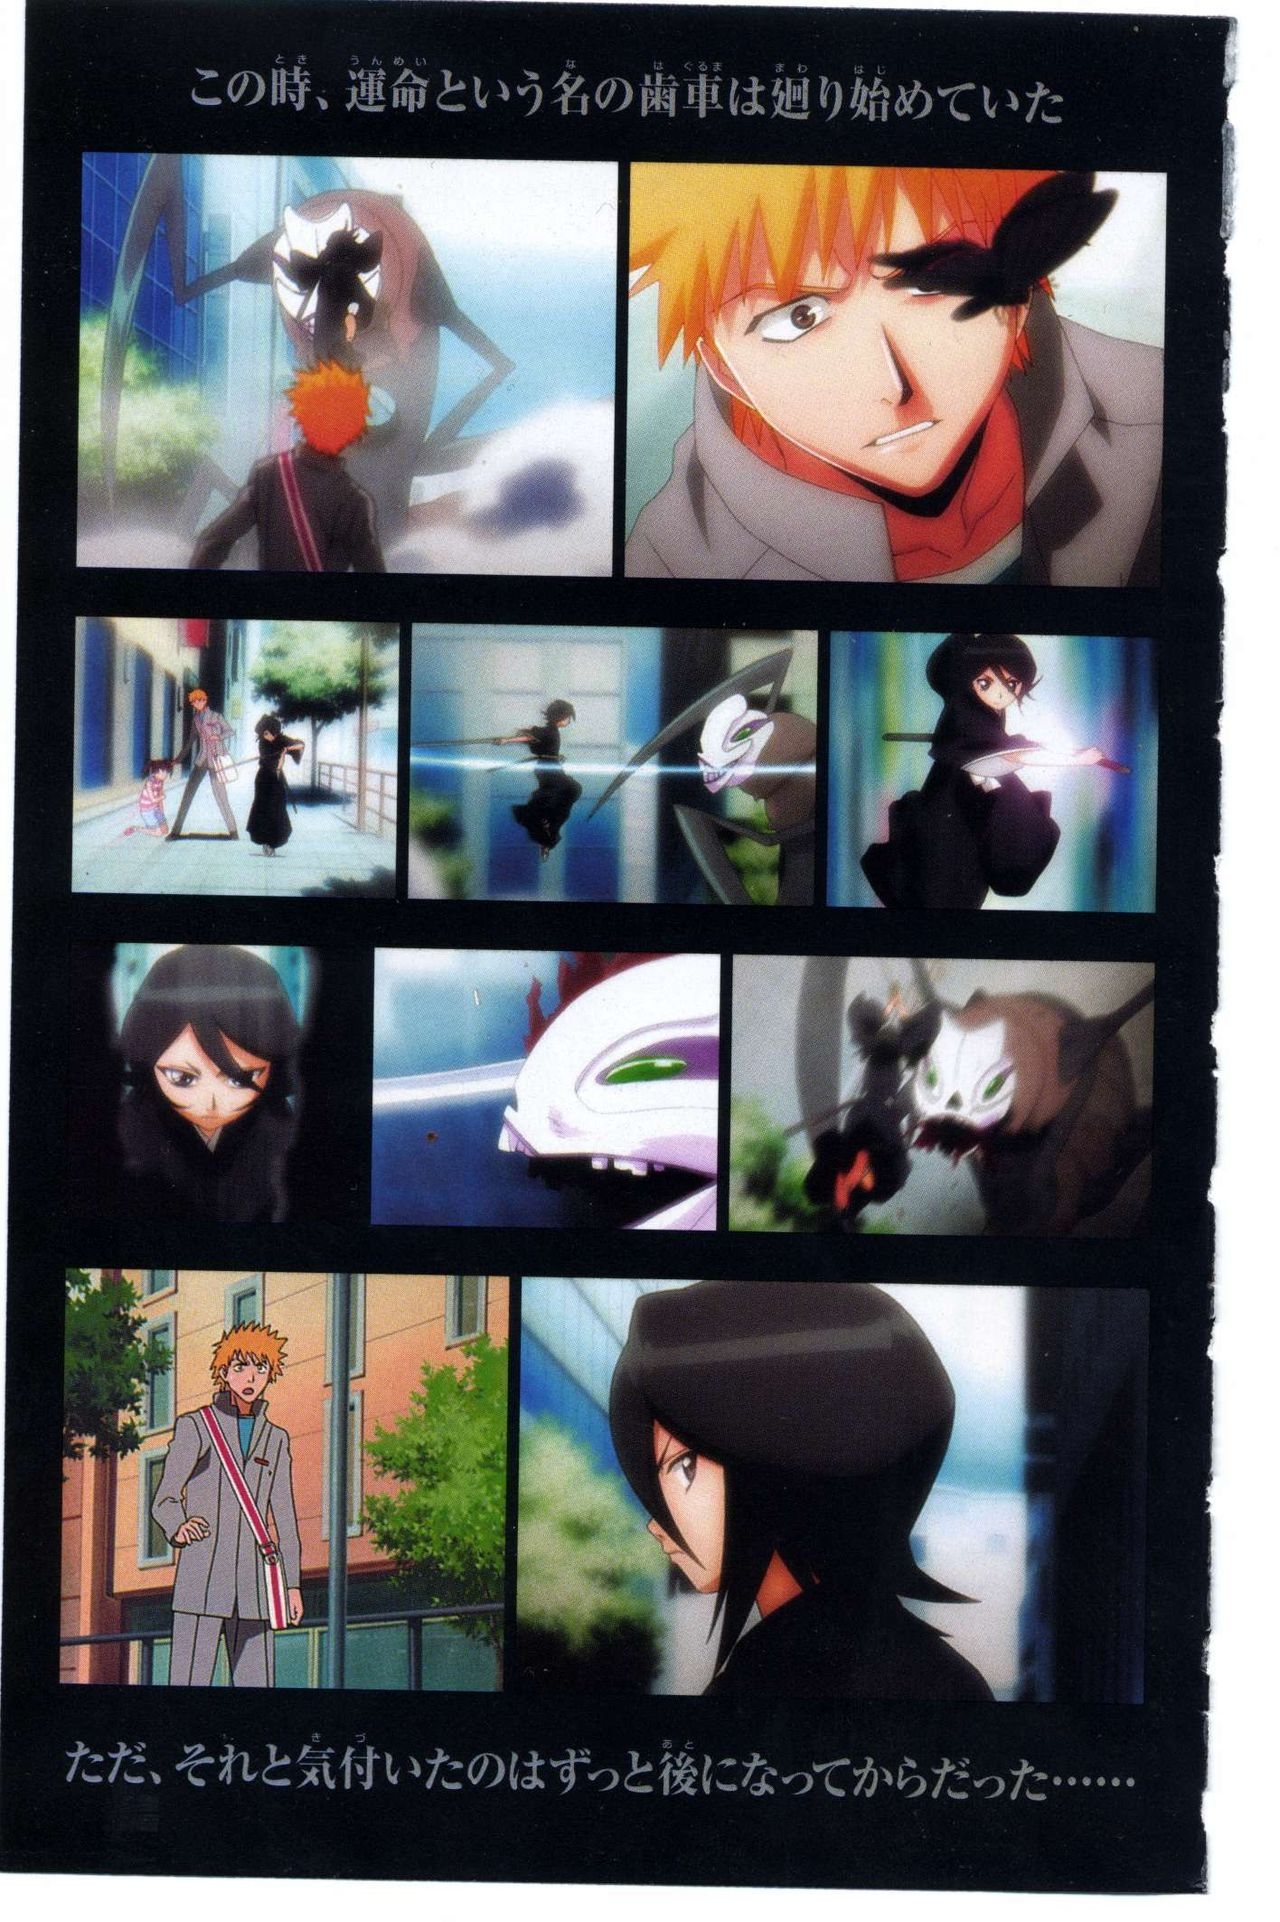 Bleach: Official Animation Book VIBEs 9